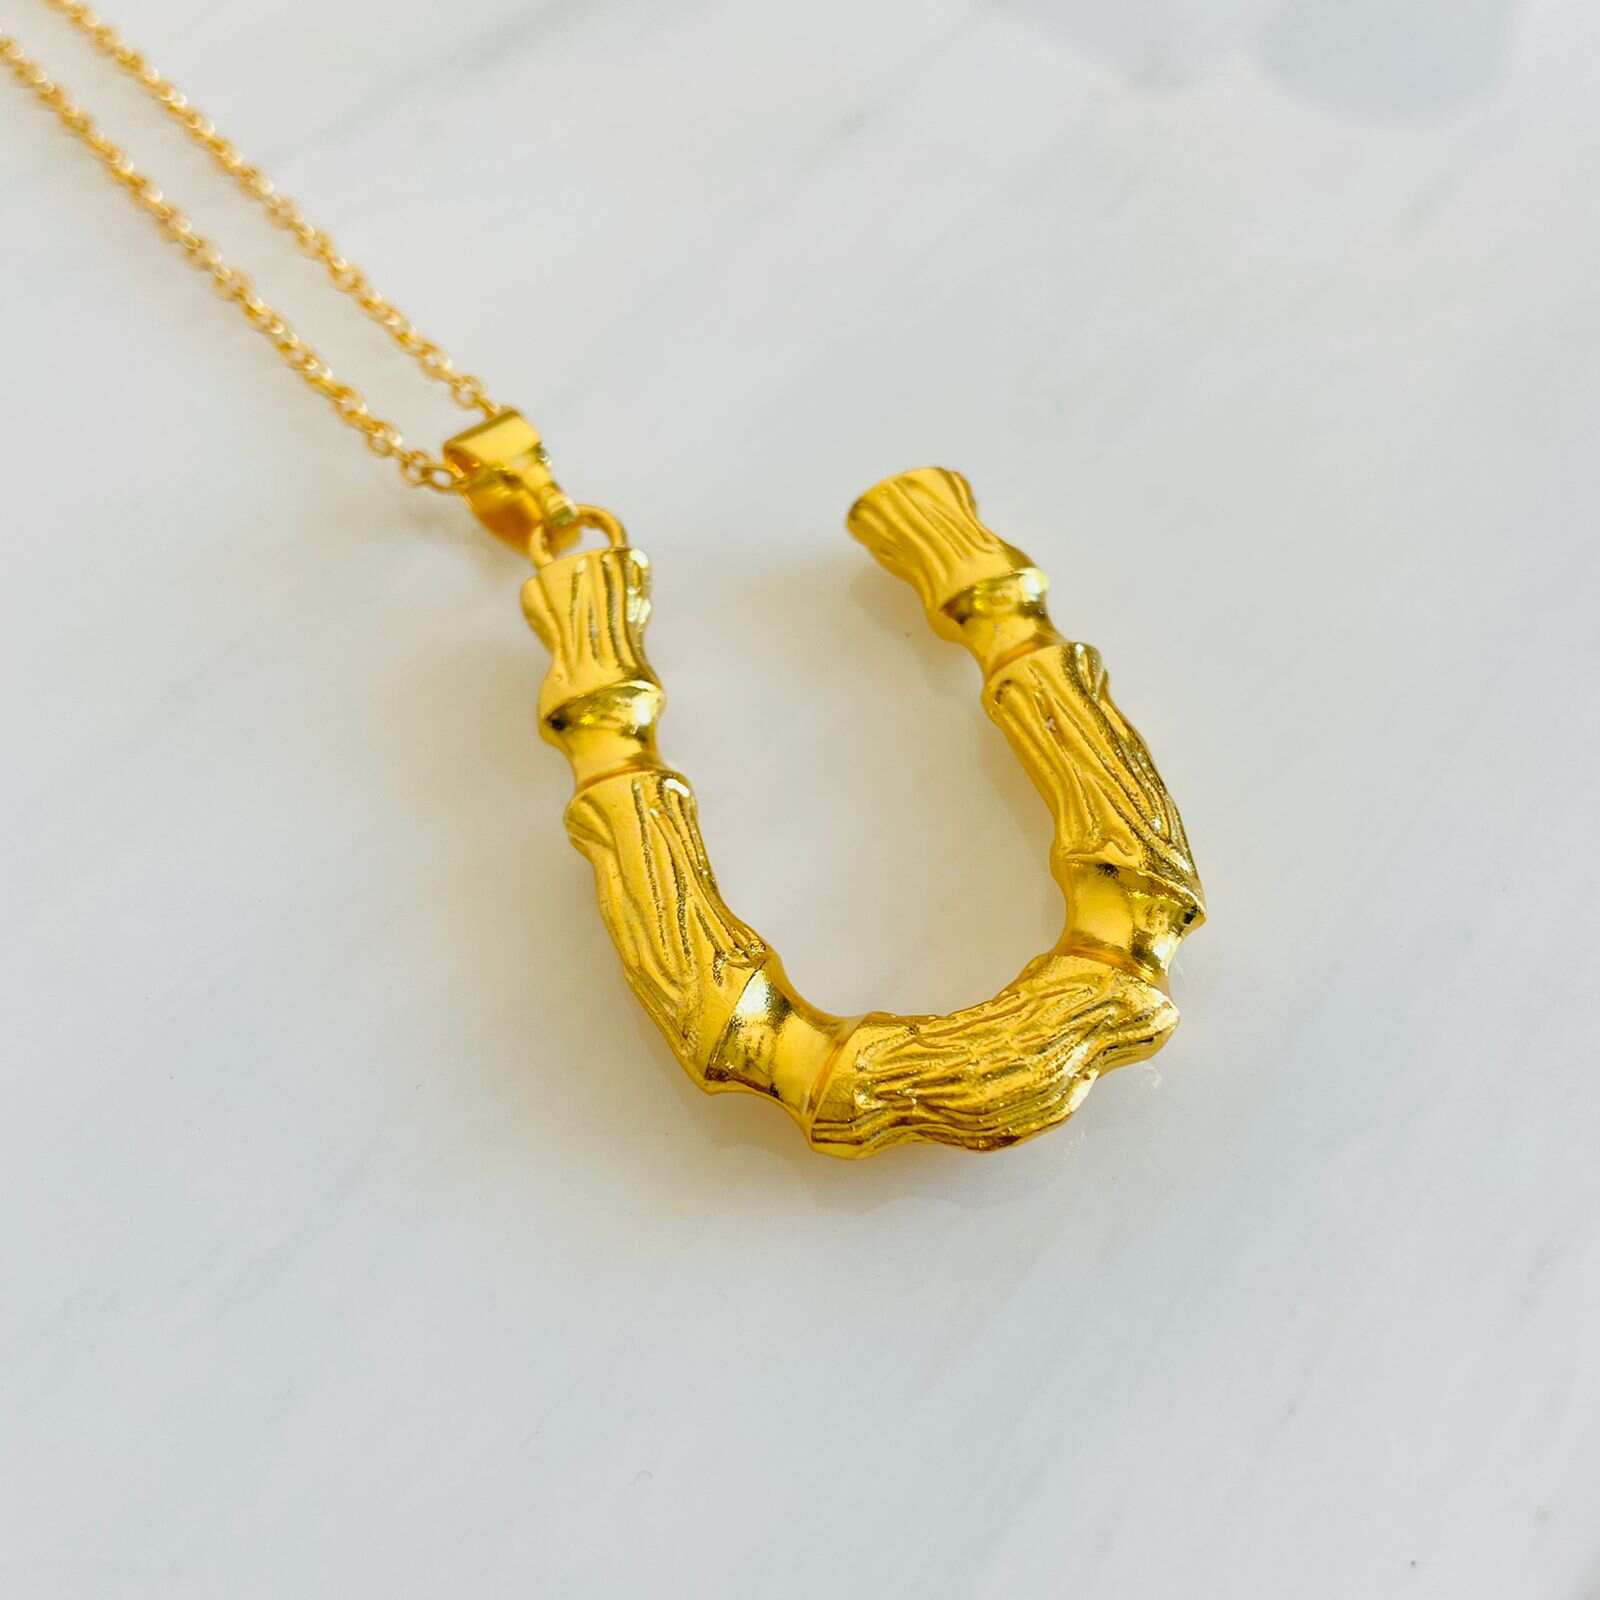 Floral Letter M Initial Dainty Silver/Gold Floral Engraved Boho/Indie  Necklace | Indie necklace, Initial pendant necklace, Jewelry bundle